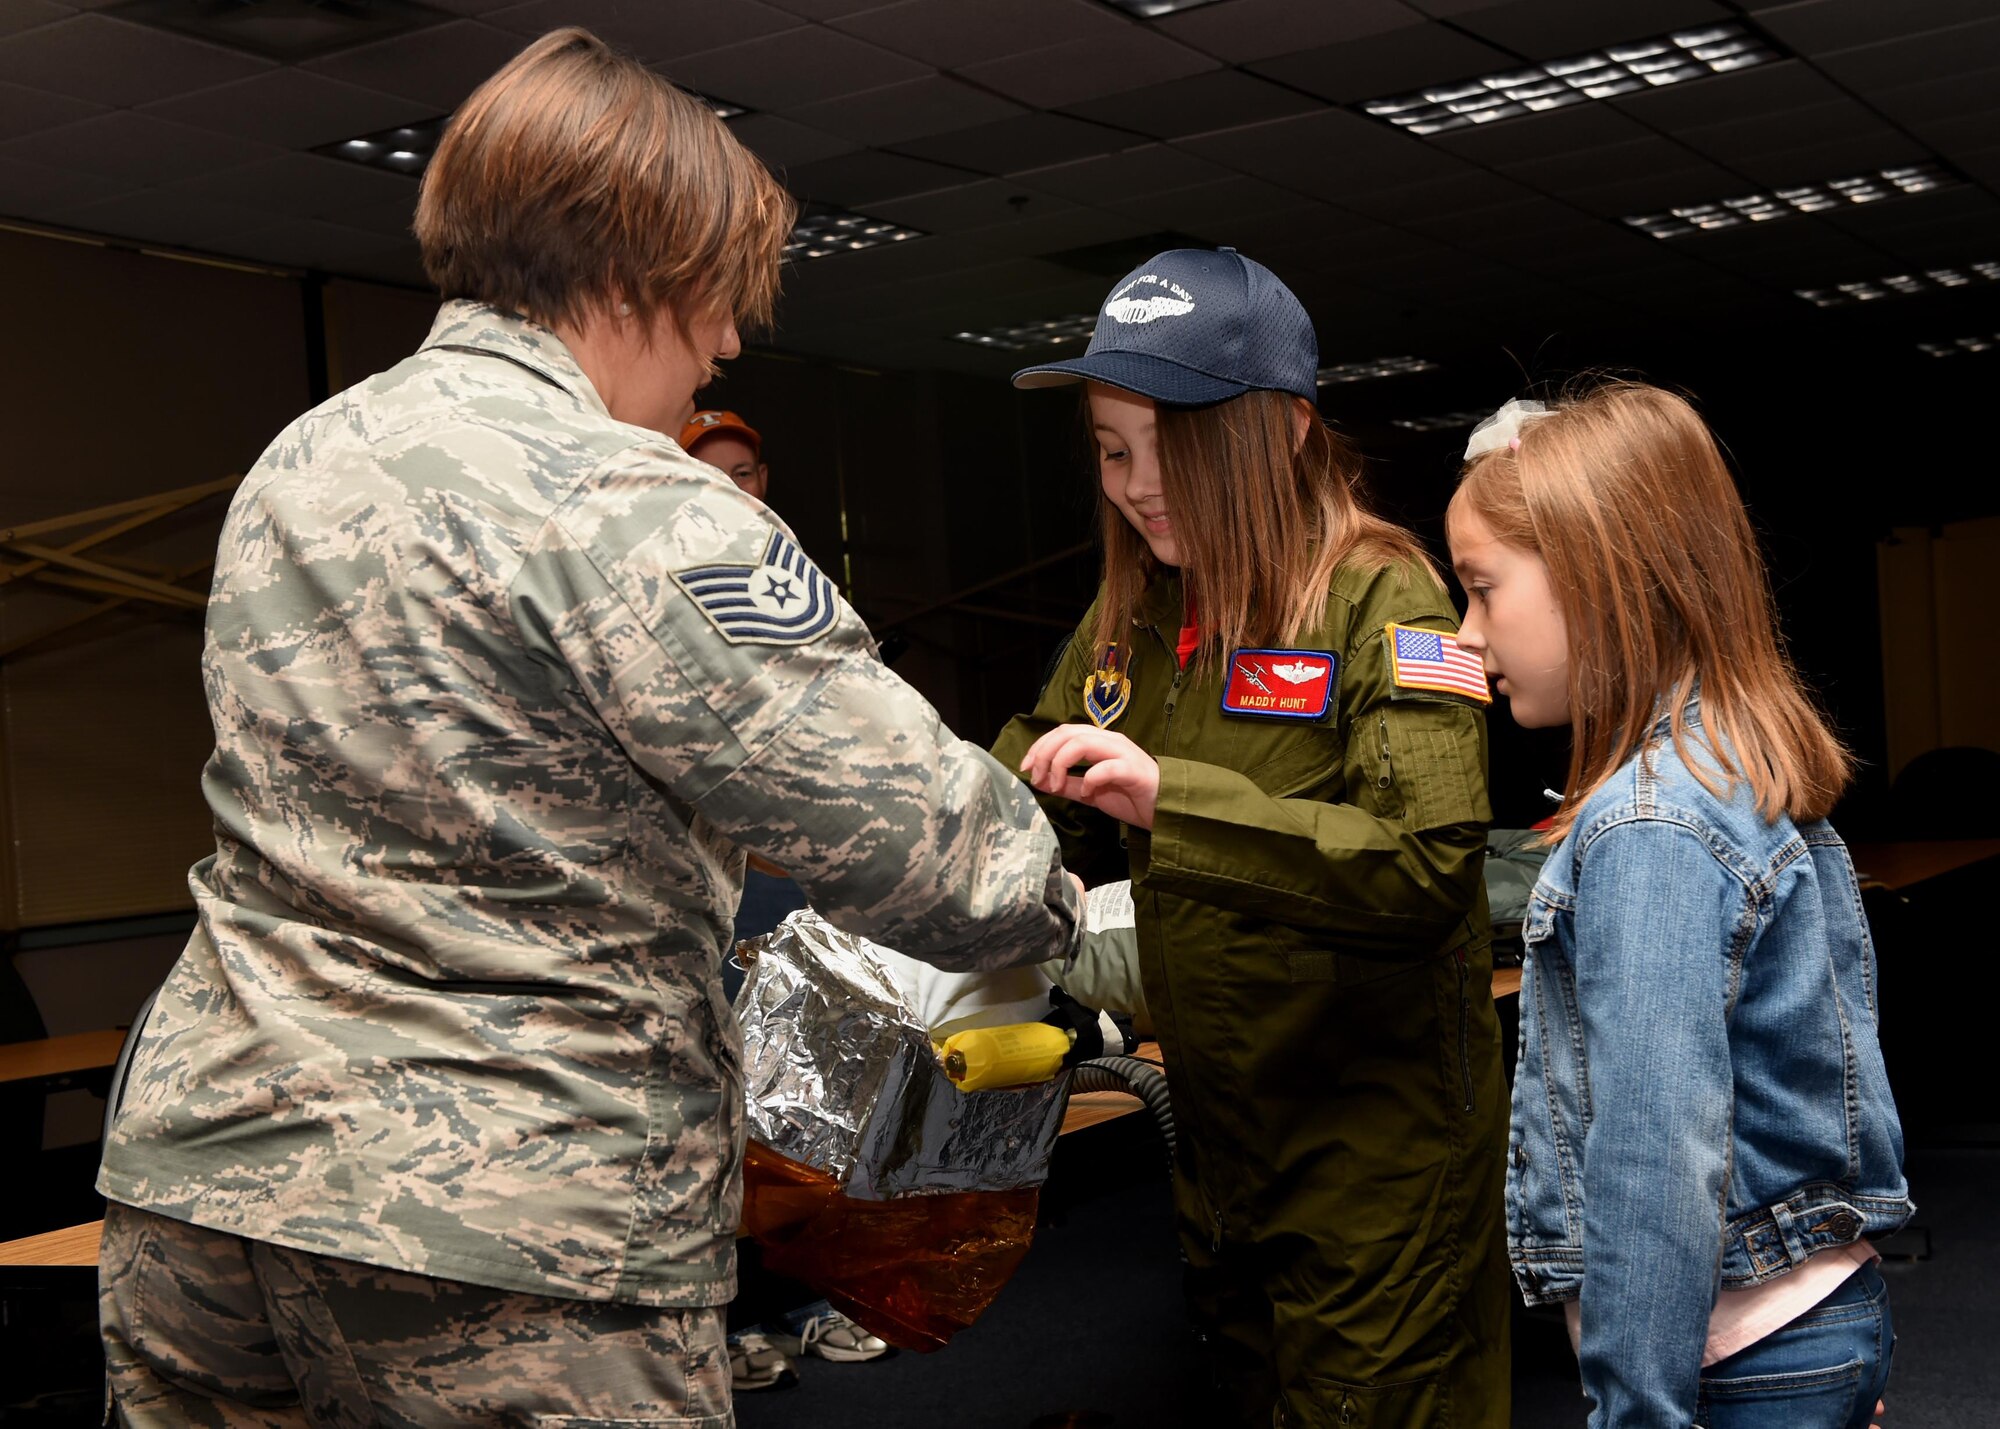 U.S. Air Force Tech. Sgt. Christie Kidder, 97th Operations Support Squadron flight chief of Aircrew Flight Equipment demonstrates how to use an oxygen mask to Maddy Hunt during the Pilot for a Day Program at Altus Air Force Base Oklahoma, April 14, 2017. The Pilot for a Day Program allows a child with a serious illness to tour the base and experience multiple aspects of Air Force life. (U.S. Air Force photo by SrA. Megan E. Myhre/Released)